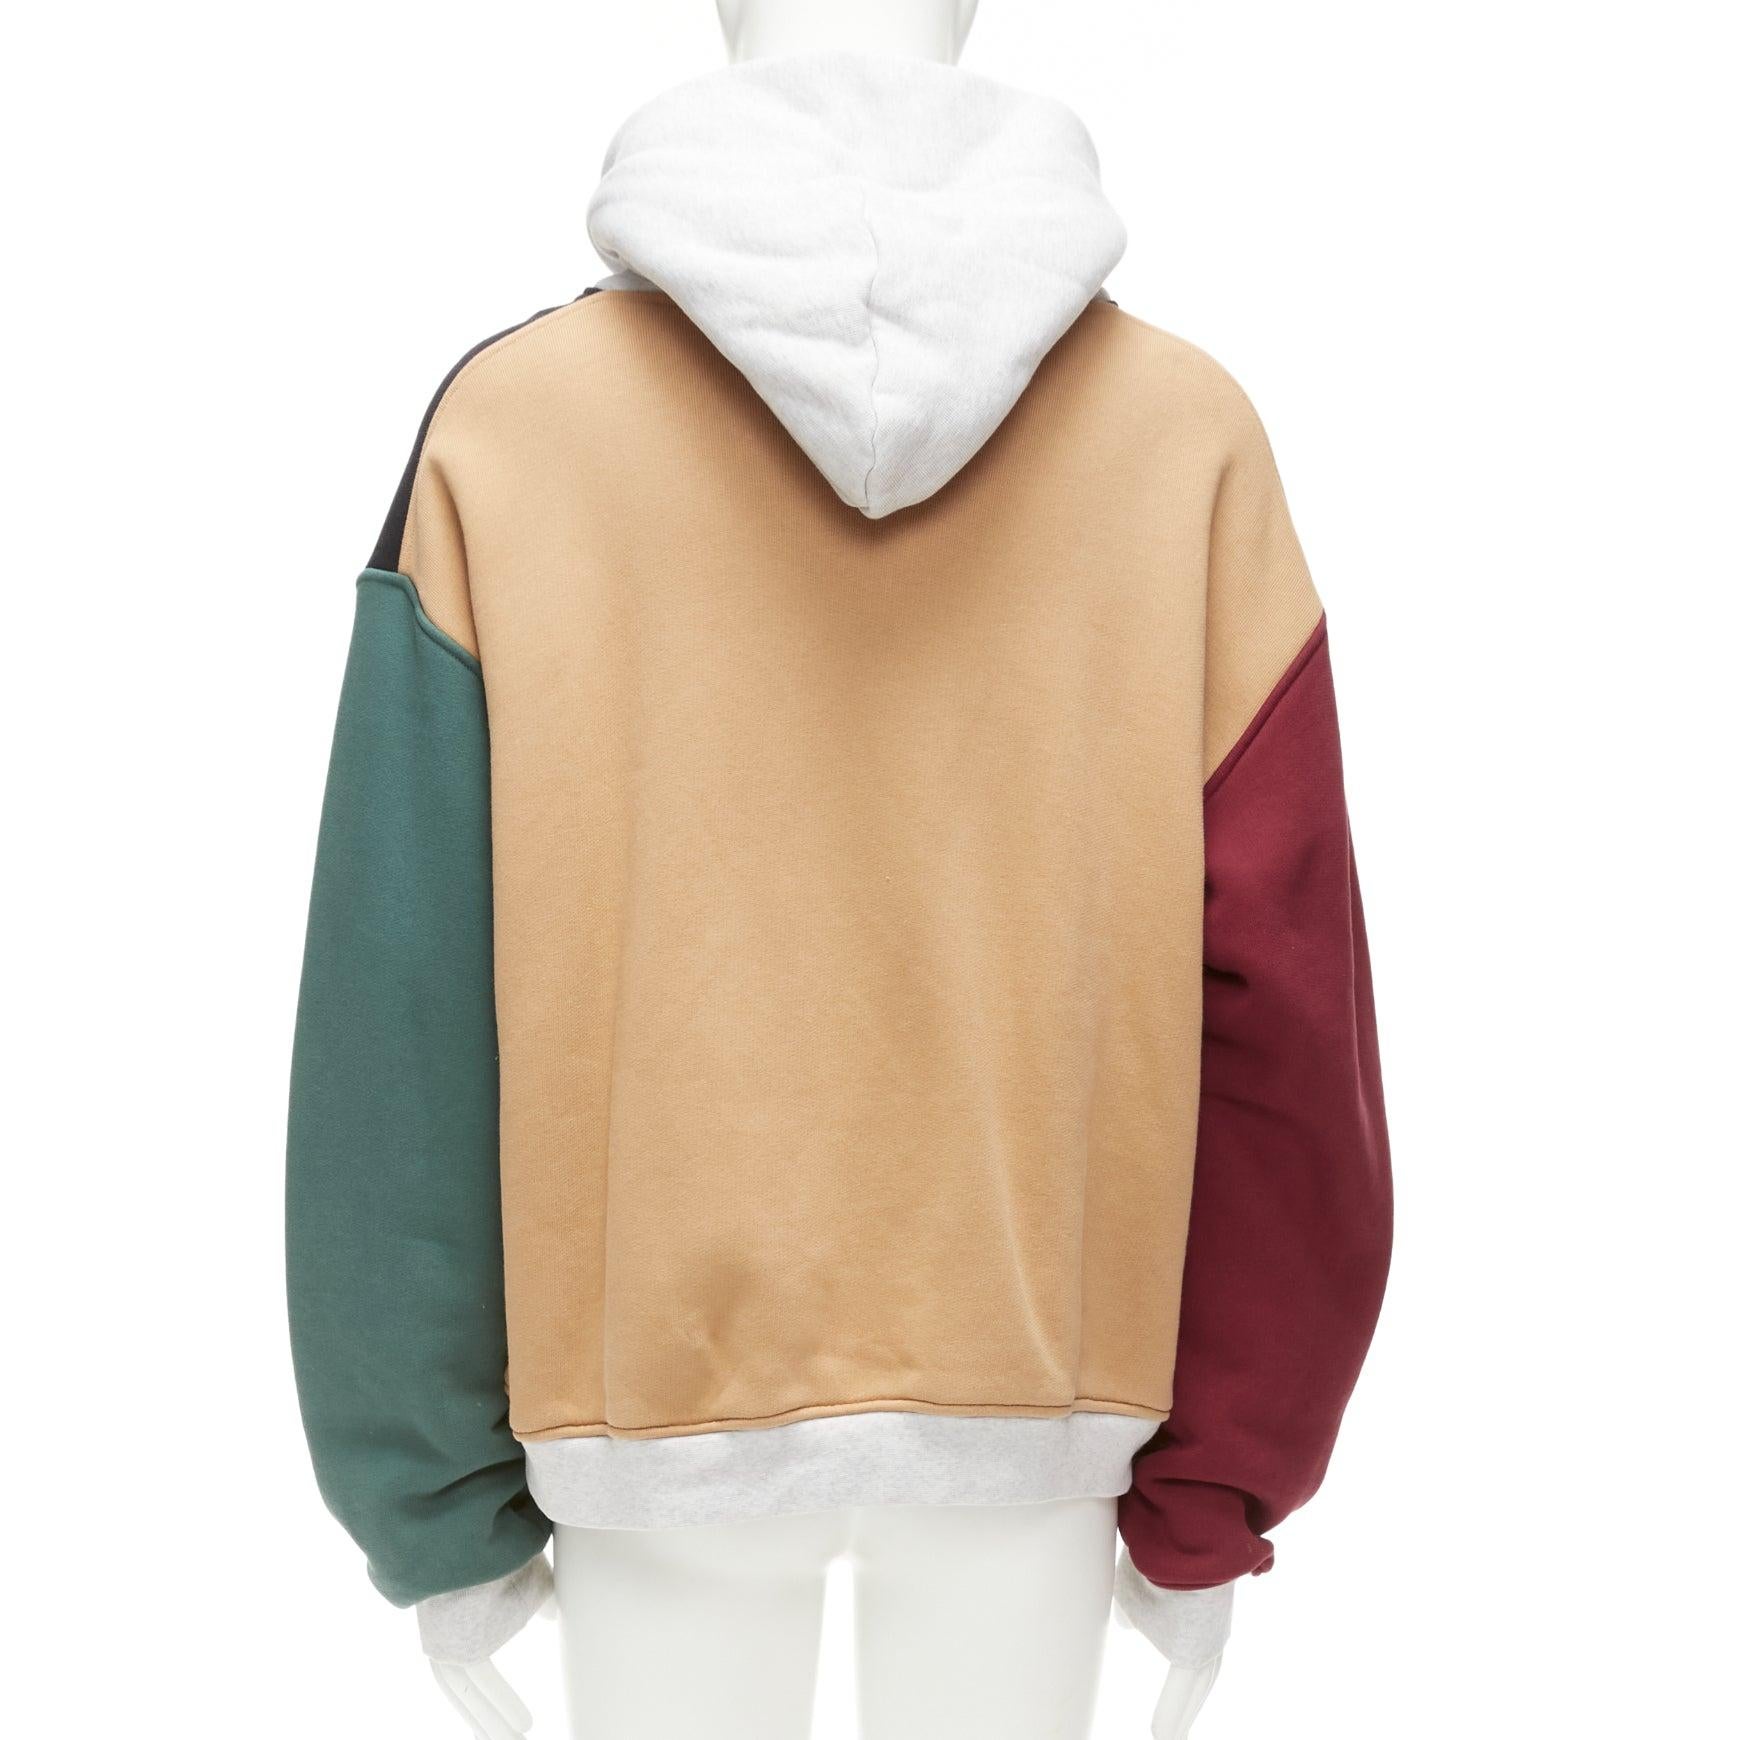 ALEXANDER WANG multicolour colorblocked panelled hoodie sweatshirt M
Reference: YIKK/A00024
Brand: Alexander Wang
Designer: Alexander Wang
Material: Cotton
Color: Multicolour, Grey
Pattern: Solid
Closure: Pullover
Extra Details: Discreet logo at